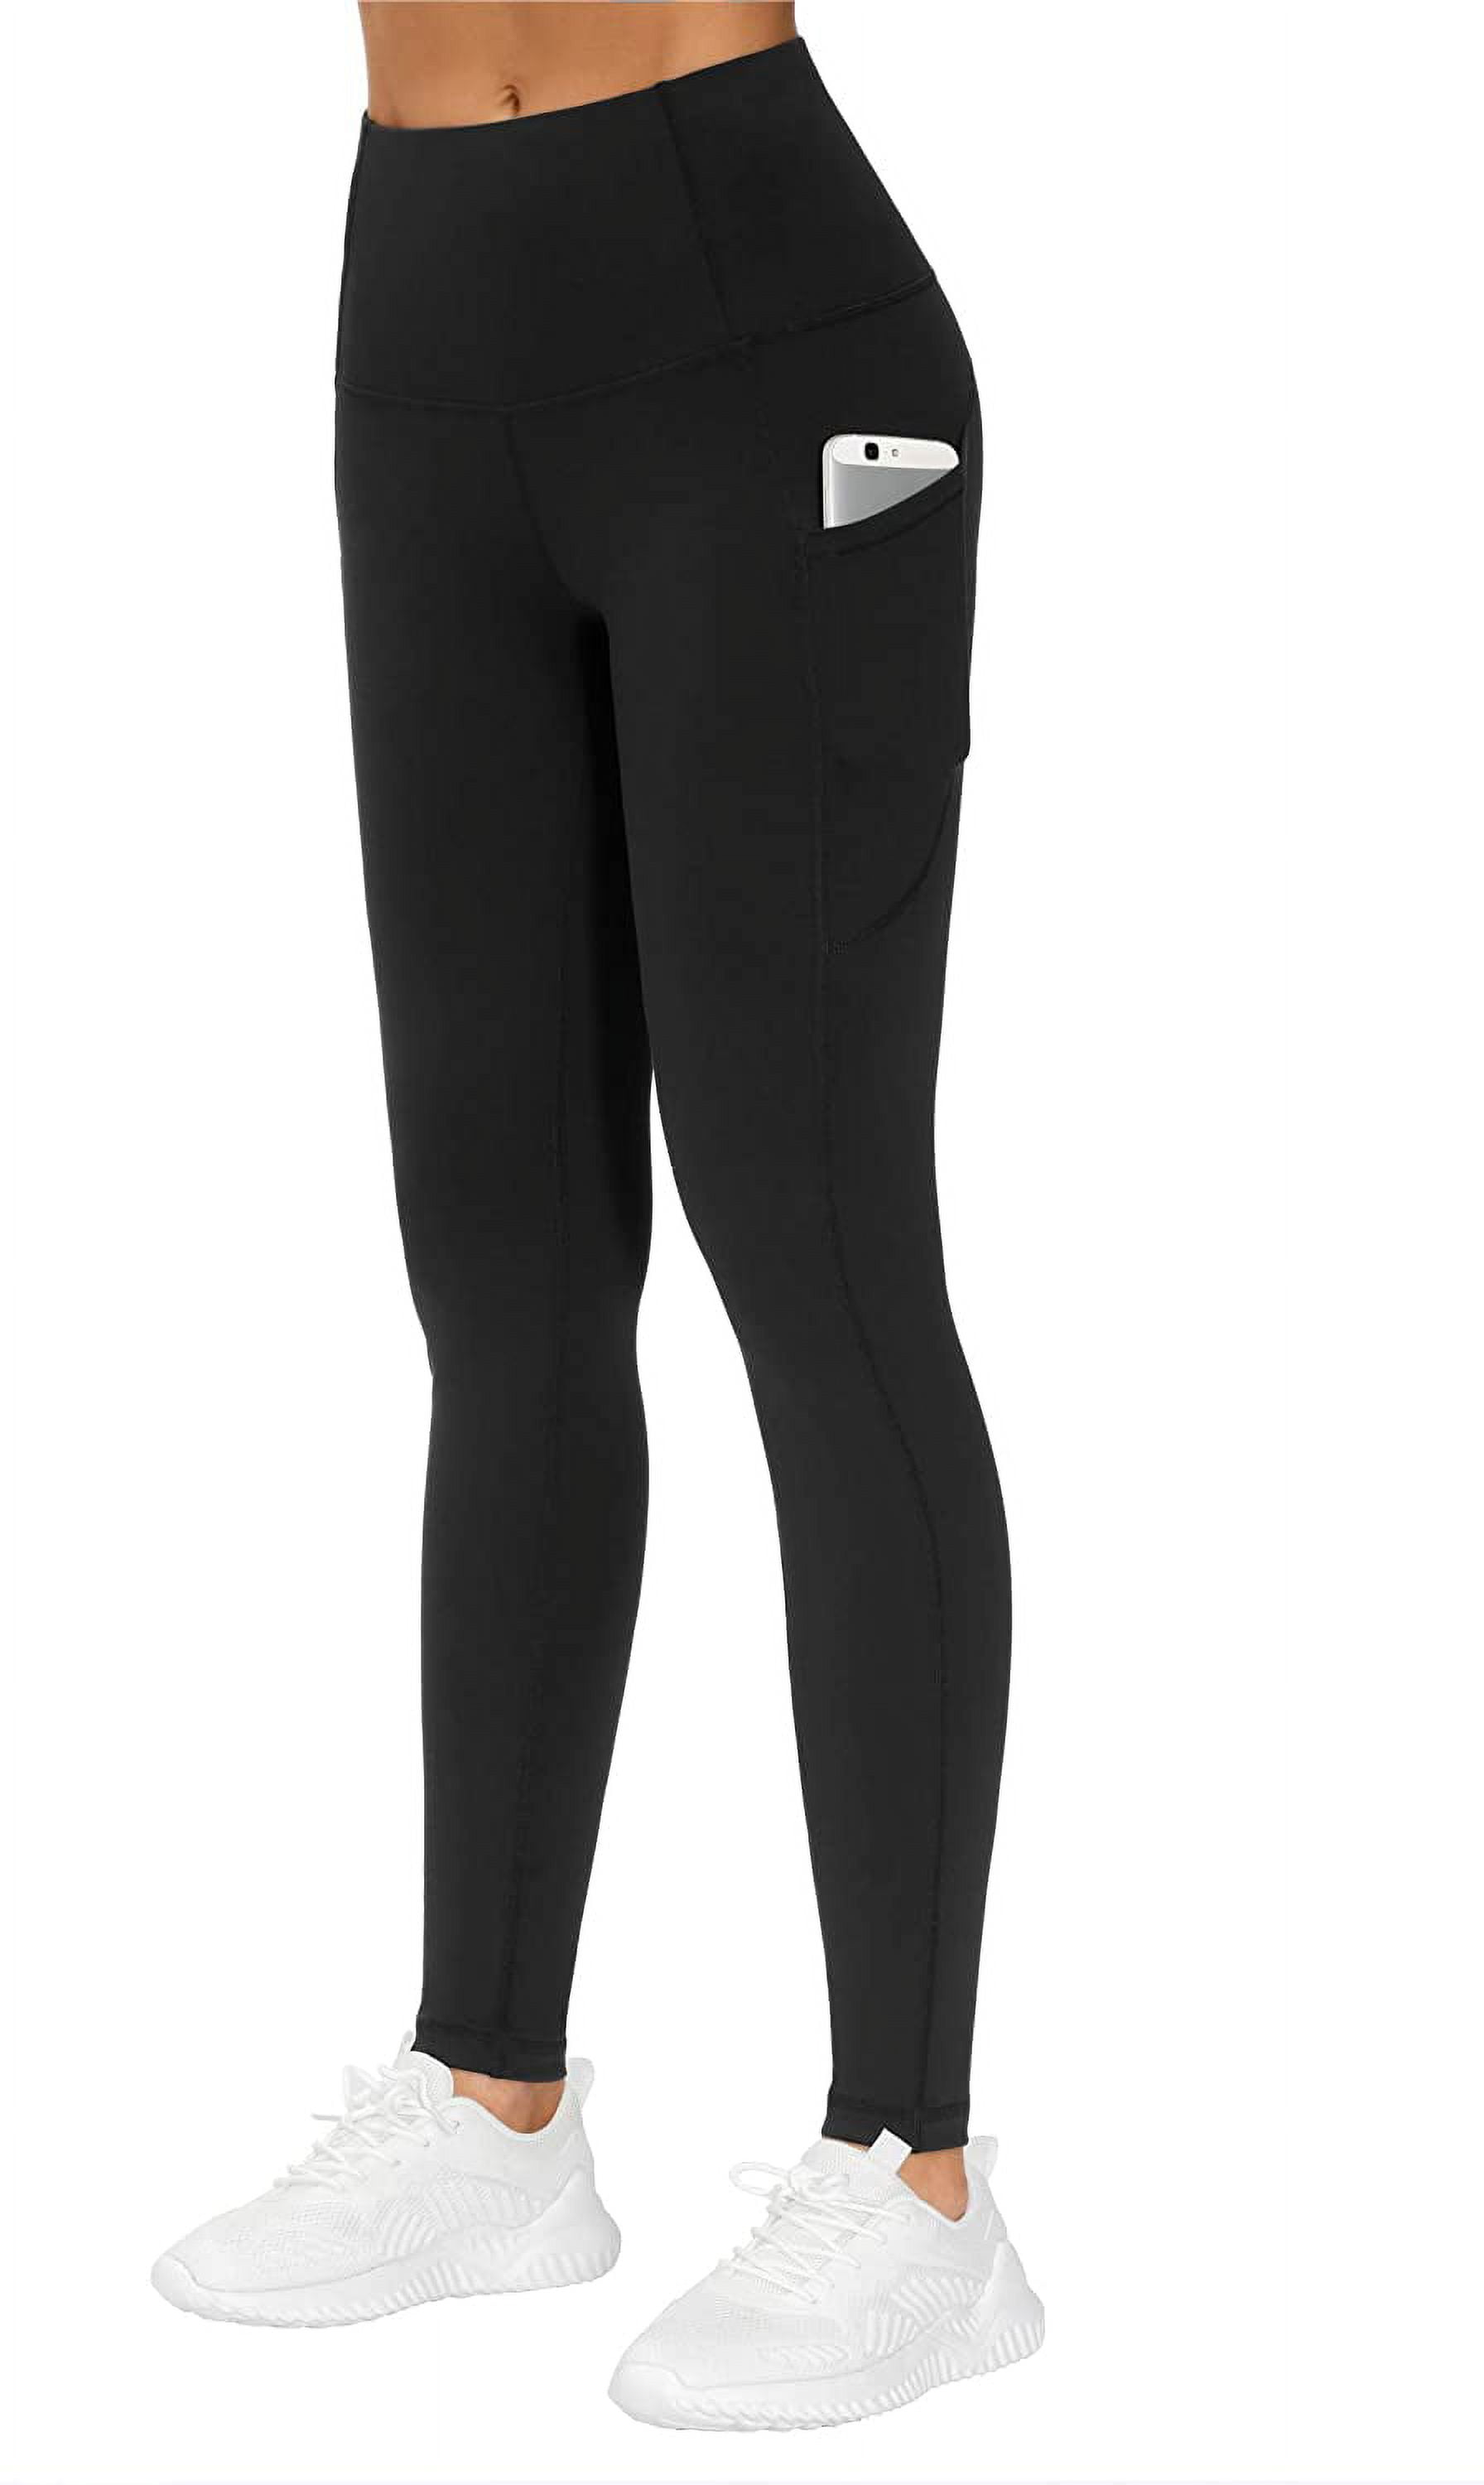 THE GYM PEOPLE Thick High Waist Yoga Pants with Pockets, Tummy Control  Workout Running Yoga Leggings for Women XX-Large Black 